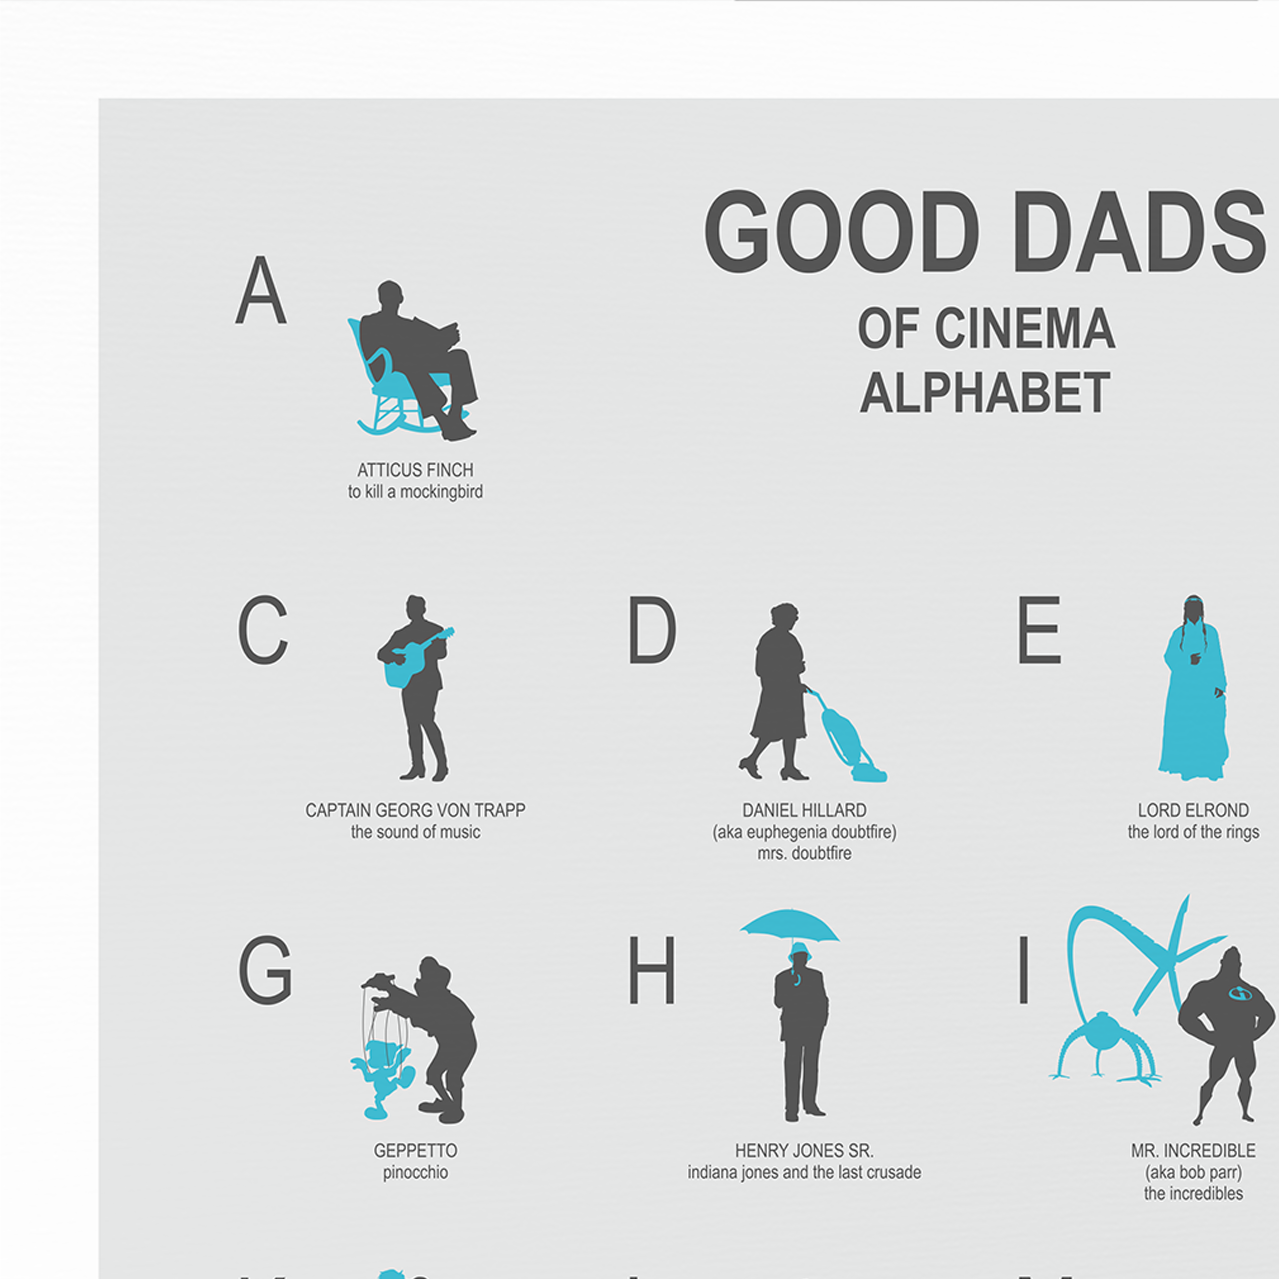 Set of 2 prints, Best Moms and Best Dads in Film Alphabet